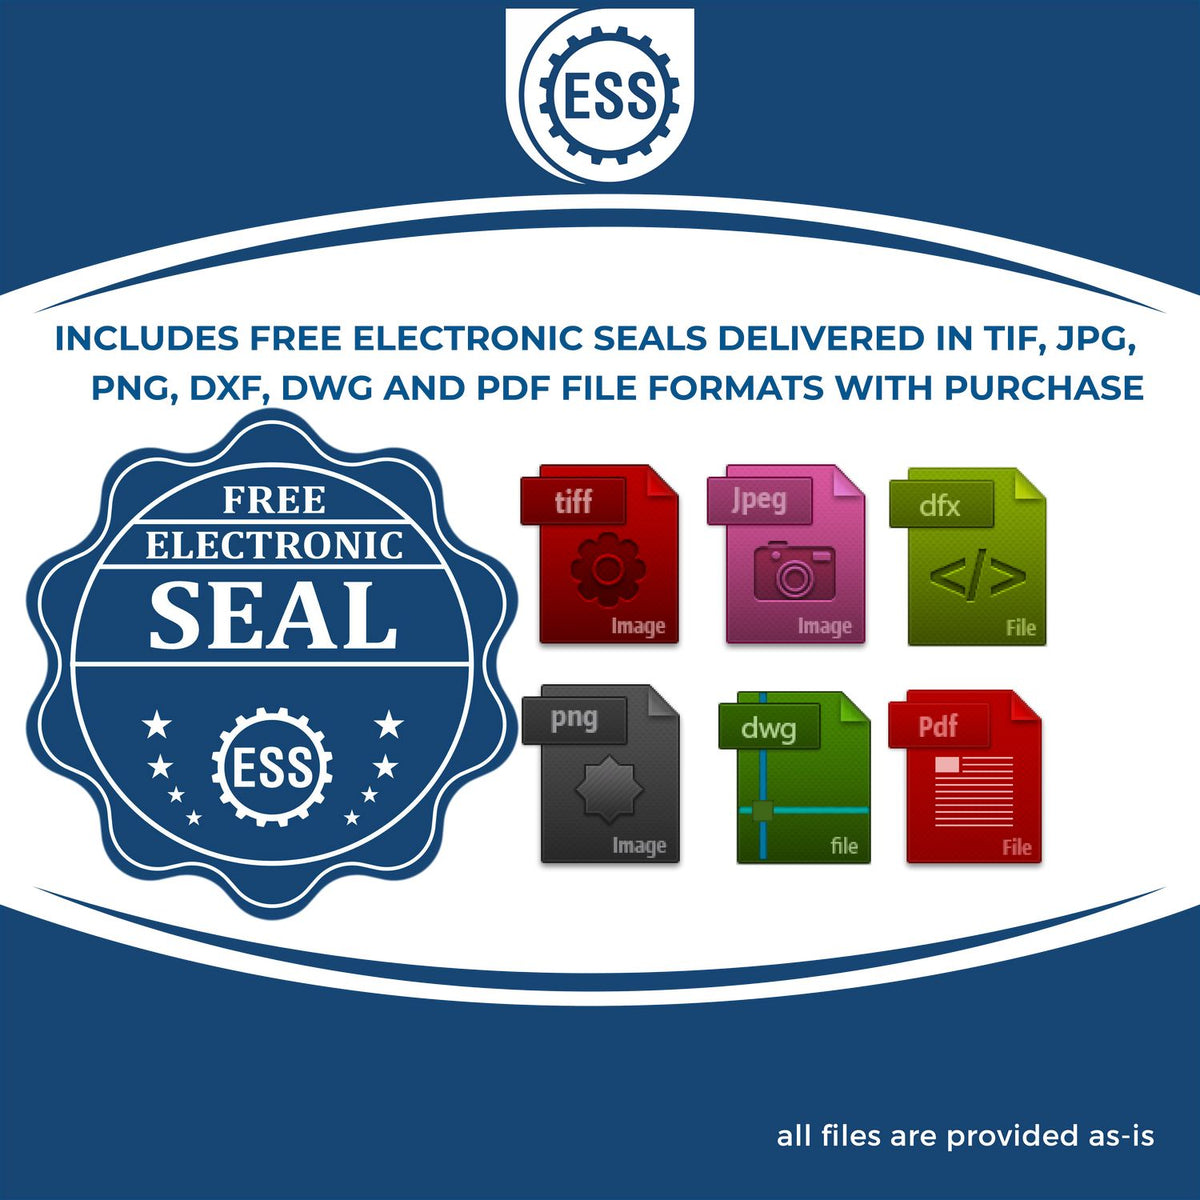 An infographic for the free electronic seal for the Soft Georgia Professional Geologist Seal illustrating the different file type icons such as DXF, DWG, TIF, JPG and PNG.